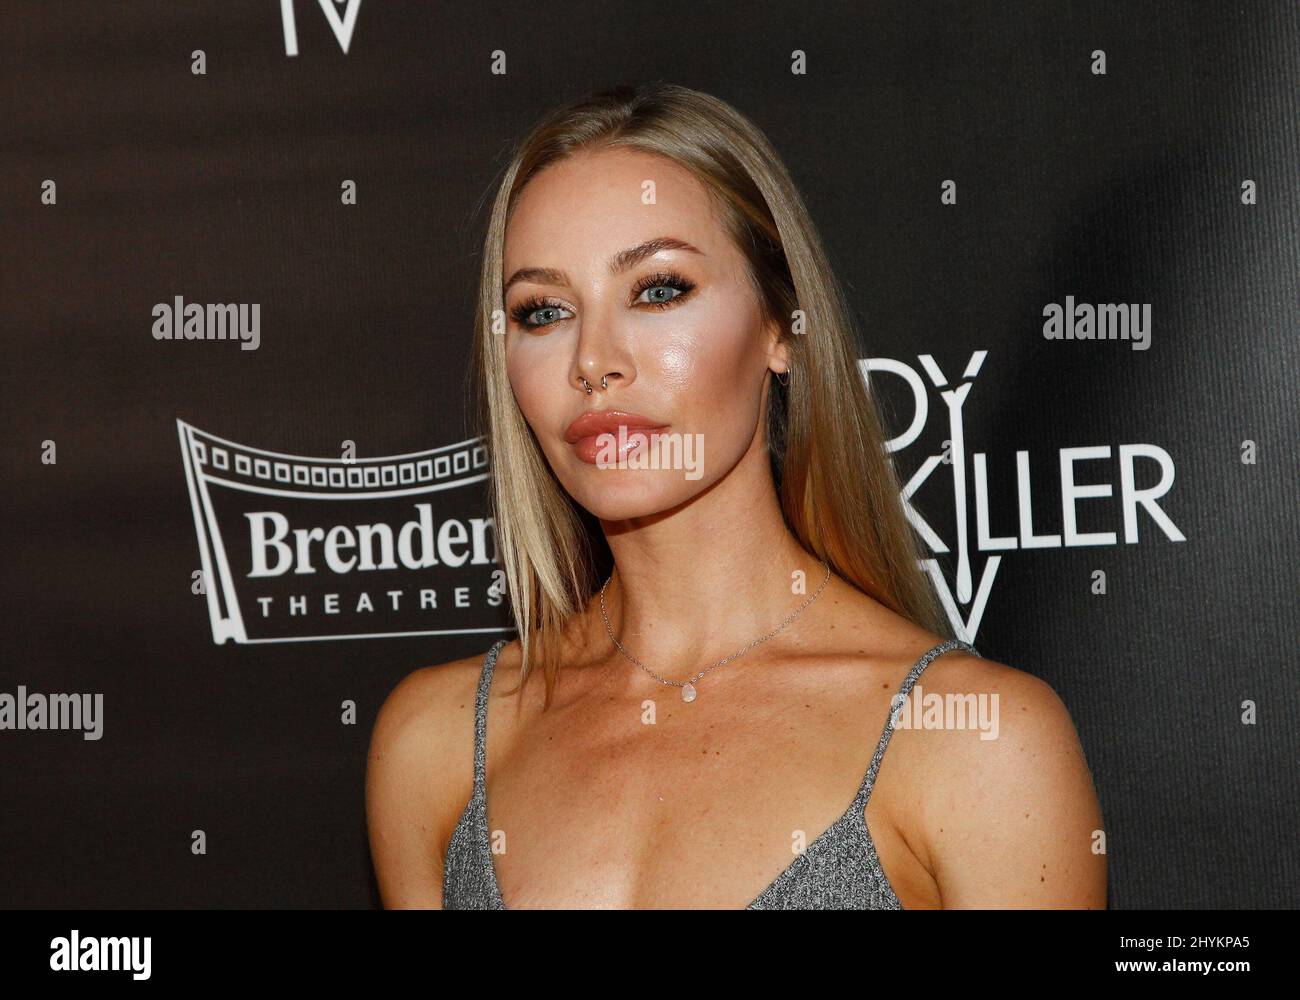 Nicole Aniston at the TV premiere of 'Lady Killer' held at the Brenden Theater inside the Palms Casino in Las Vegas Stock Photo